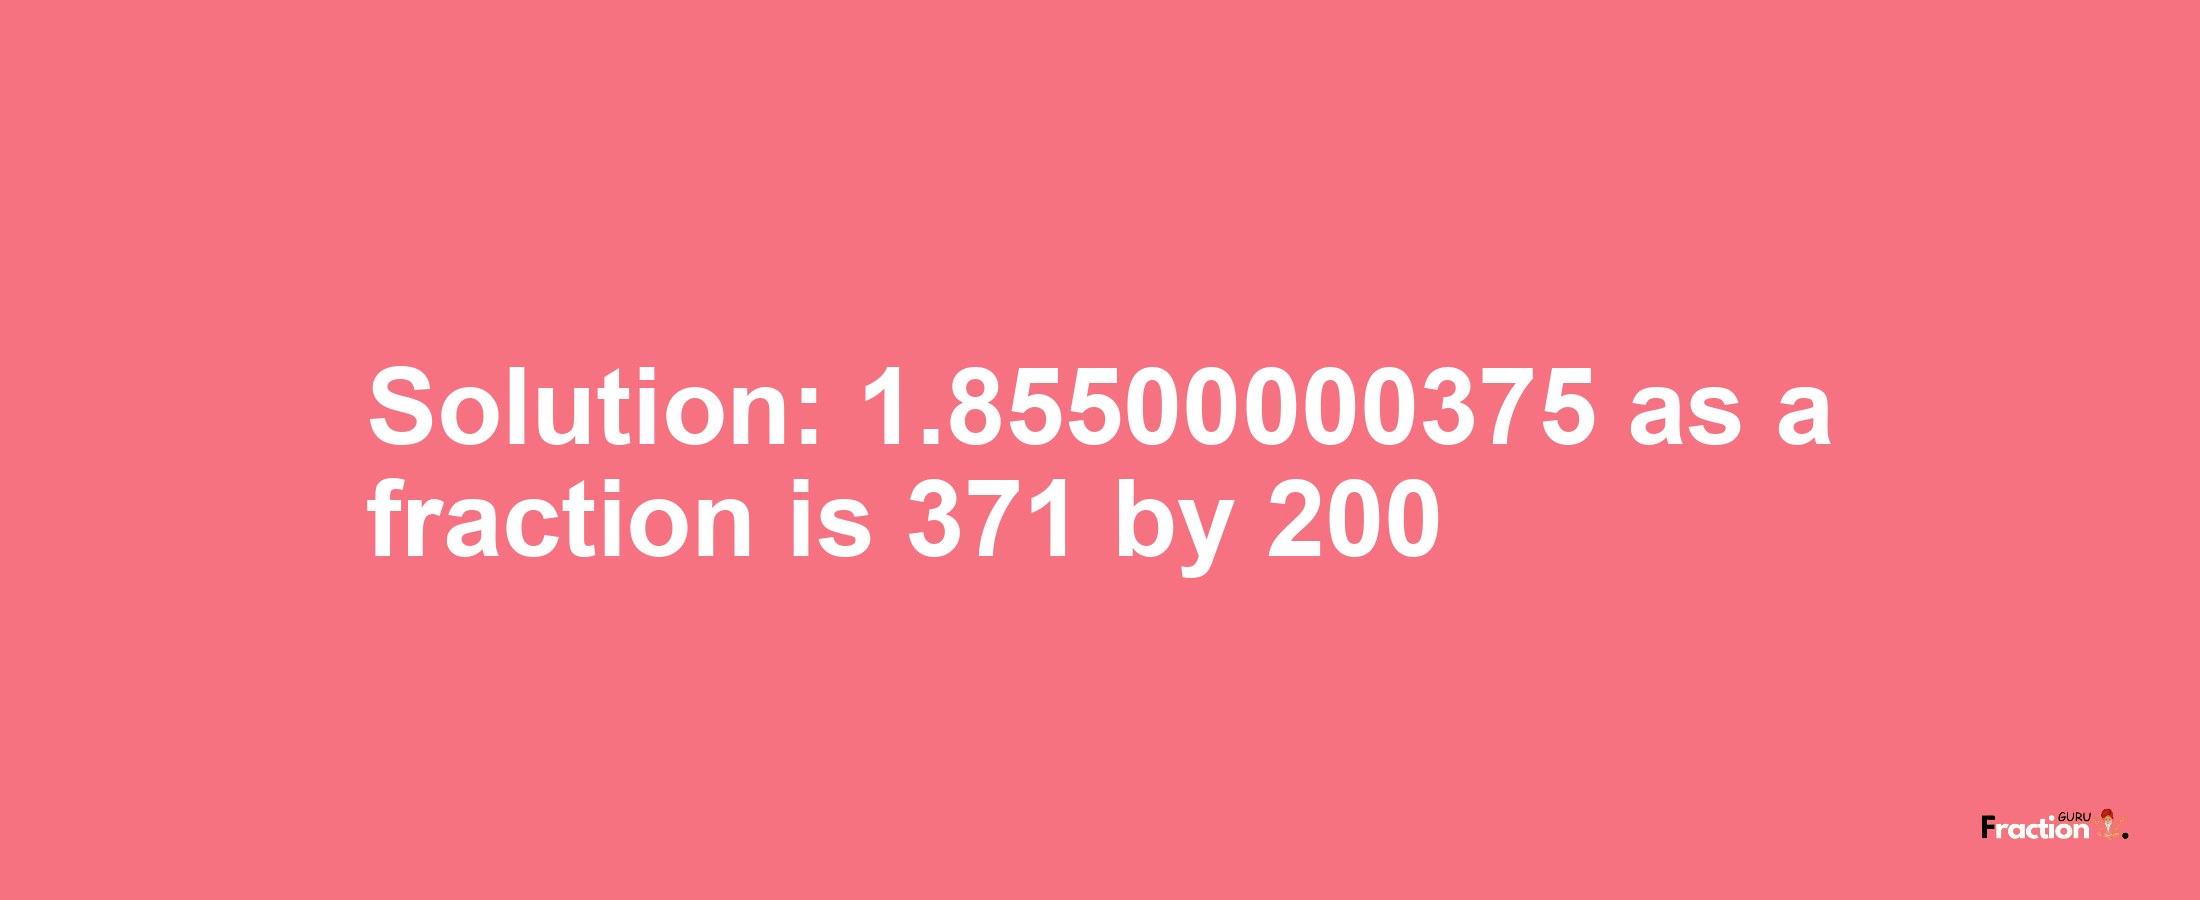 Solution:1.85500000375 as a fraction is 371/200